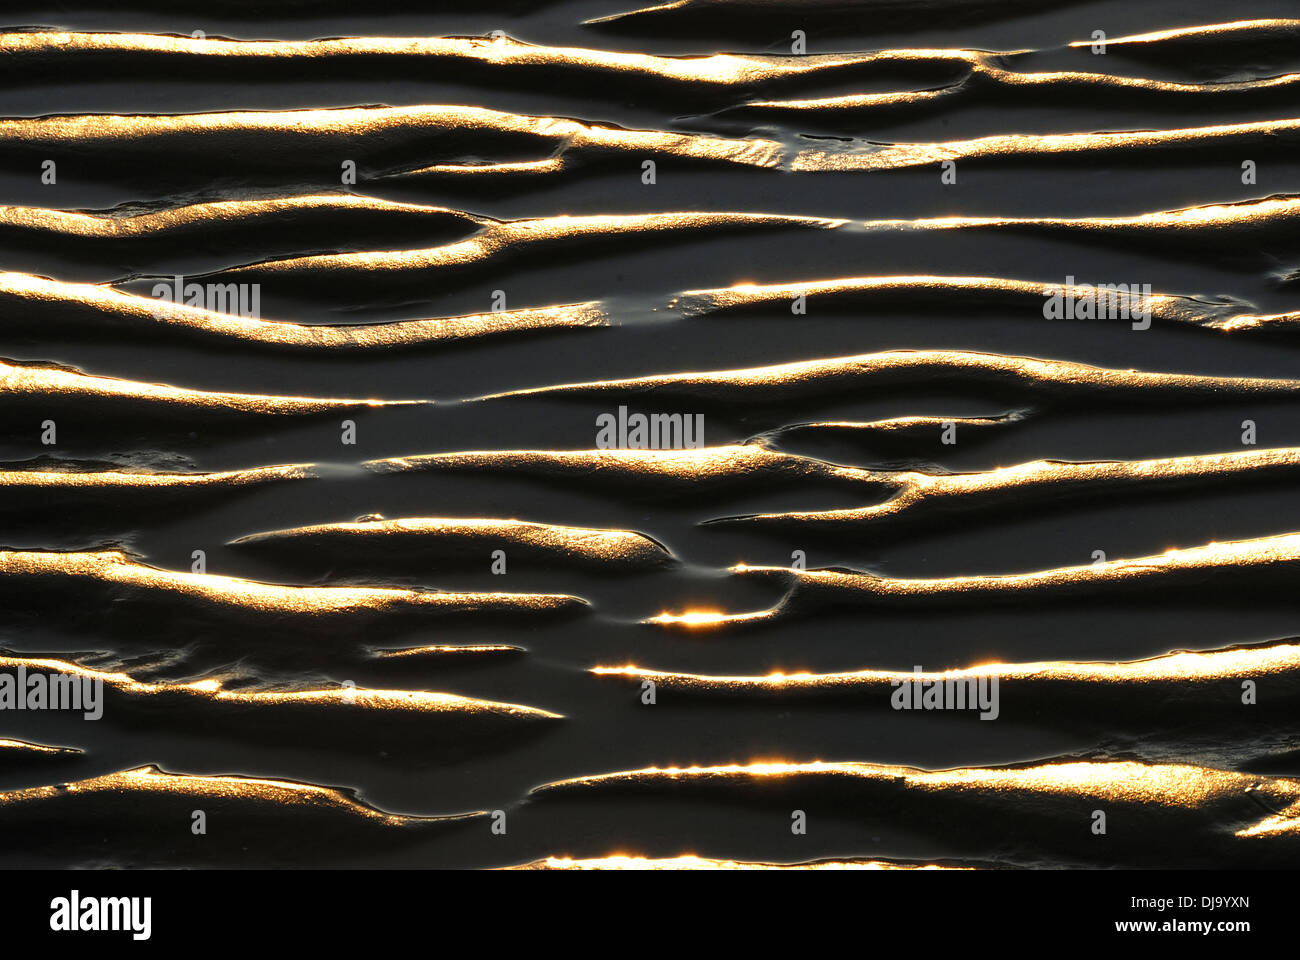 Sunlight catching sand ripples at low tide UK Stock Photo